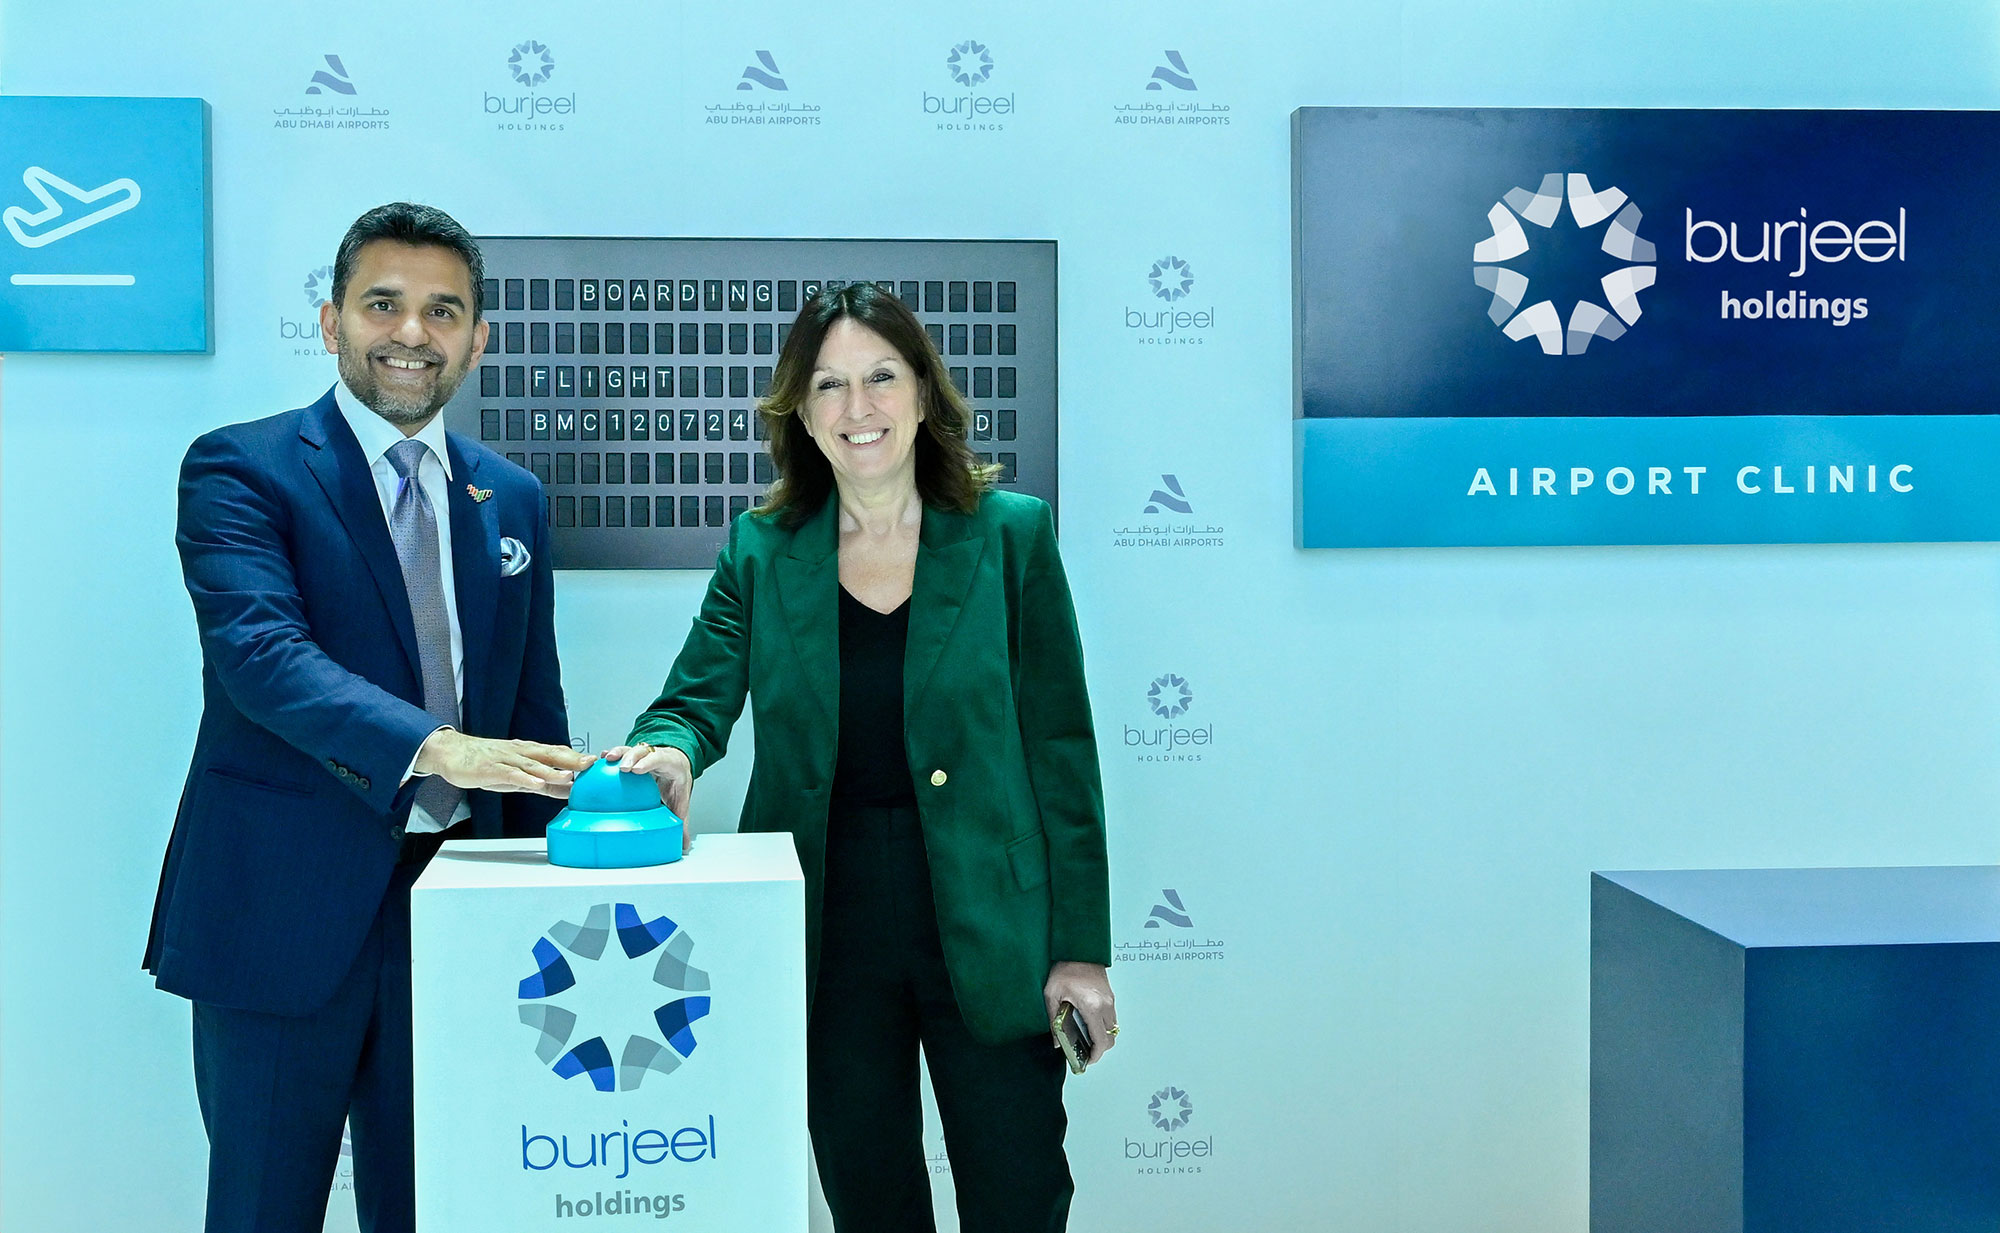 Burjeel Holdings Launches 24/7 Airport Clinic to Serve Zayed International Airport